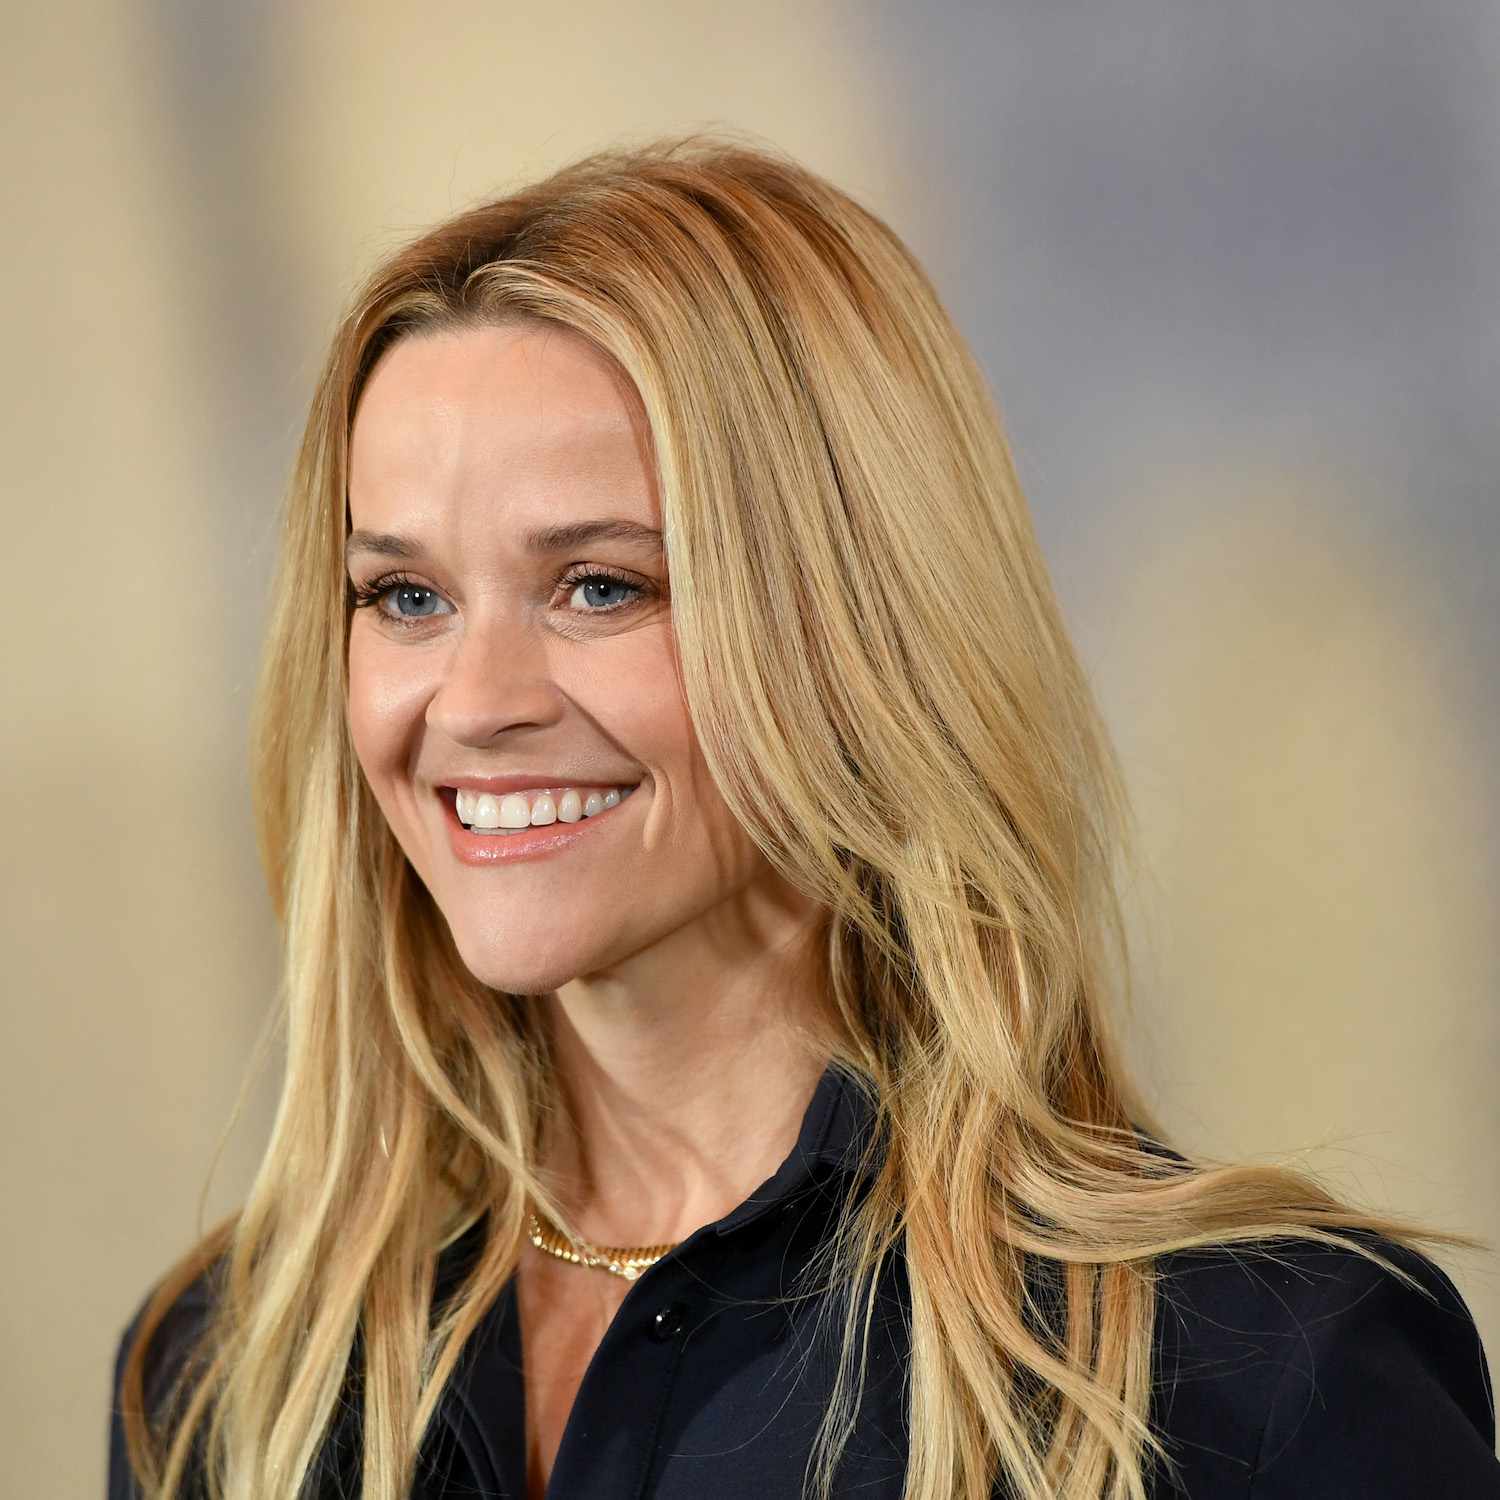 Reese Witherspoon wears a medium-length hairstyle with soft, face-framing layers